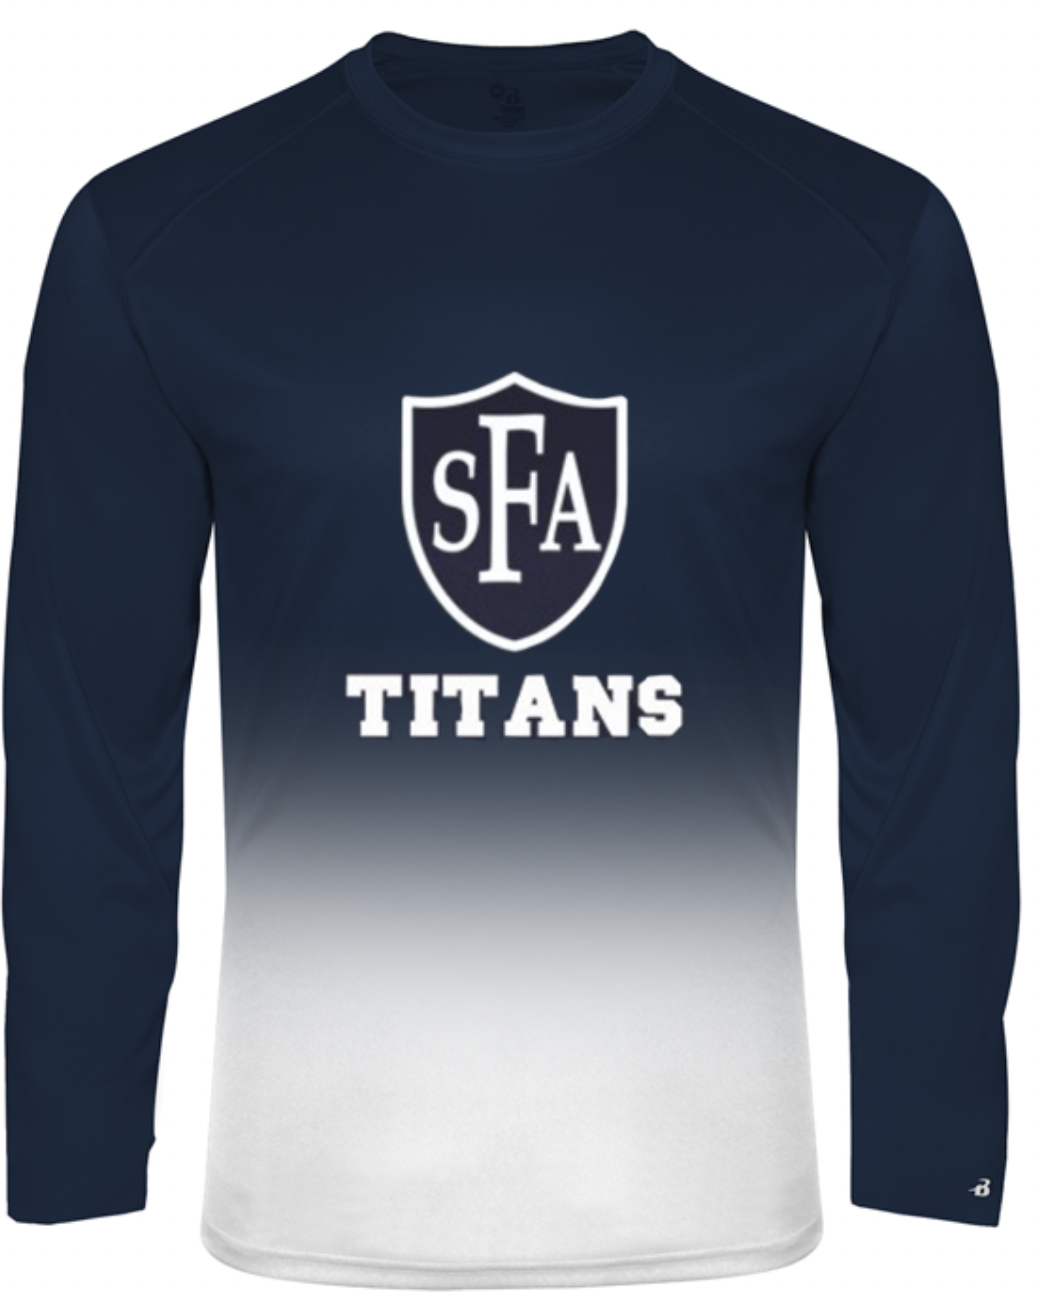 SFA Spirit Ombre L/S T-Shirt w/ Titan Logo - Please Allow 2-3 Weeks for Delivery